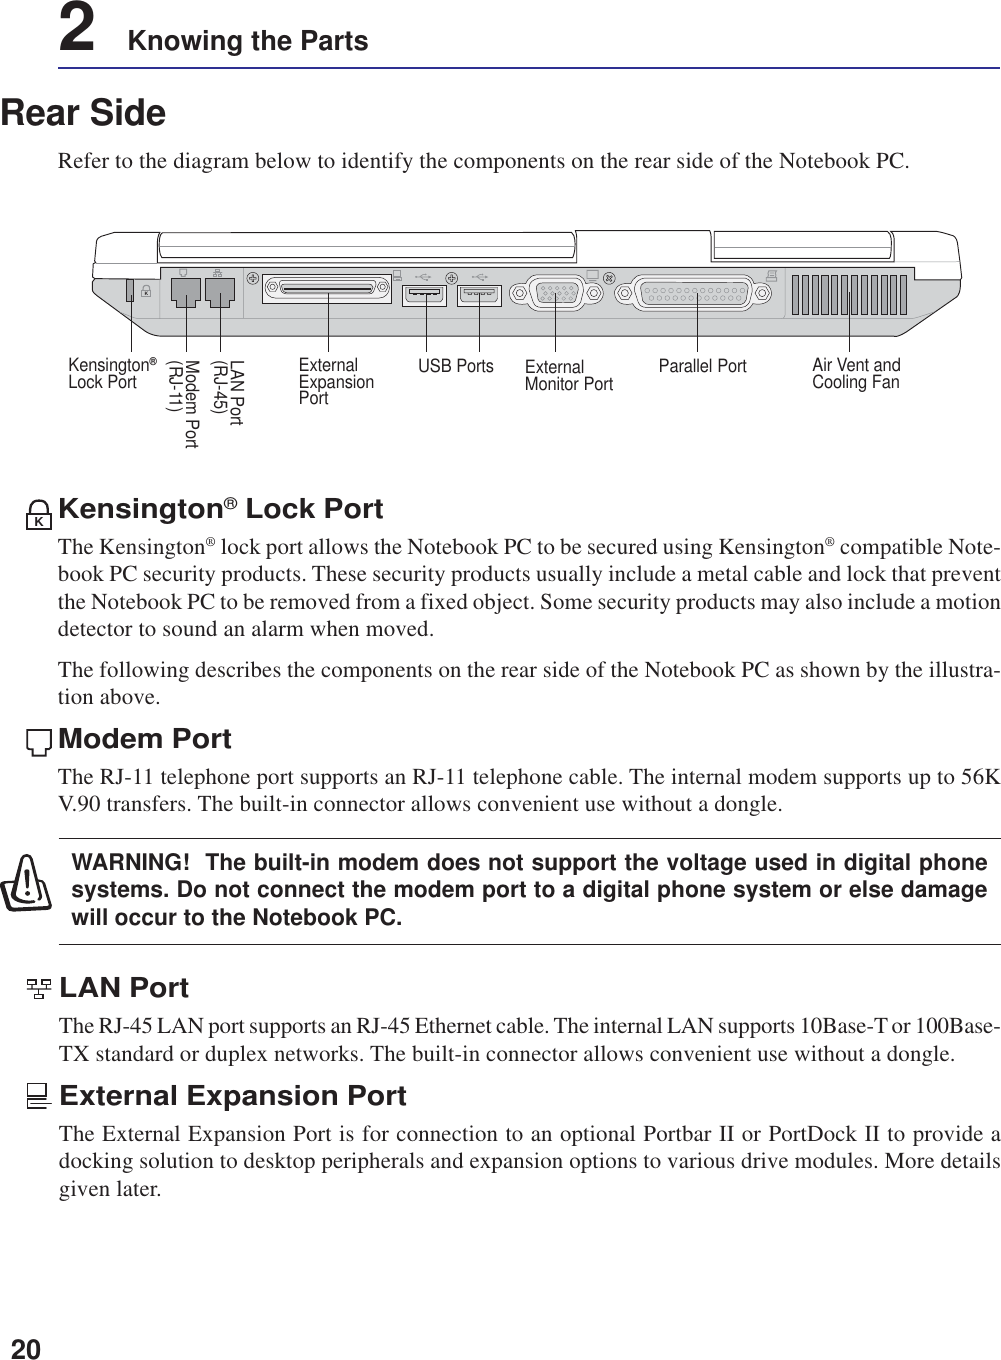 202    Knowing the PartsRear SideRefer to the diagram below to identify the components on the rear side of the Notebook PC.Kensington® Lock PortThe Kensington® lock port allows the Notebook PC to be secured using Kensington® compatible Note-book PC security products. These security products usually include a metal cable and lock that preventthe Notebook PC to be removed from a fixed object. Some security products may also include a motiondetector to sound an alarm when moved.The following describes the components on the rear side of the Notebook PC as shown by the illustra-tion above.Modem PortThe RJ-11 telephone port supports an RJ-11 telephone cable. The internal modem supports up to 56KV.90 transfers. The built-in connector allows convenient use without a dongle.KModem Port(RJ-11)LAN Port(RJ-45)ExternalMonitor Port Air Vent andCooling FanUSB PortsExternalExpansionPortParallel PortKensington®Lock PortKLAN PortThe RJ-45 LAN port supports an RJ-45 Ethernet cable. The internal LAN supports 10Base-T or 100Base-TX standard or duplex networks. The built-in connector allows convenient use without a dongle.External Expansion PortThe External Expansion Port is for connection to an optional Portbar II or PortDock II to provide adocking solution to desktop peripherals and expansion options to various drive modules. More detailsgiven later.WARNING!  The built-in modem does not support the voltage used in digital phonesystems. Do not connect the modem port to a digital phone system or else damagewill occur to the Notebook PC.